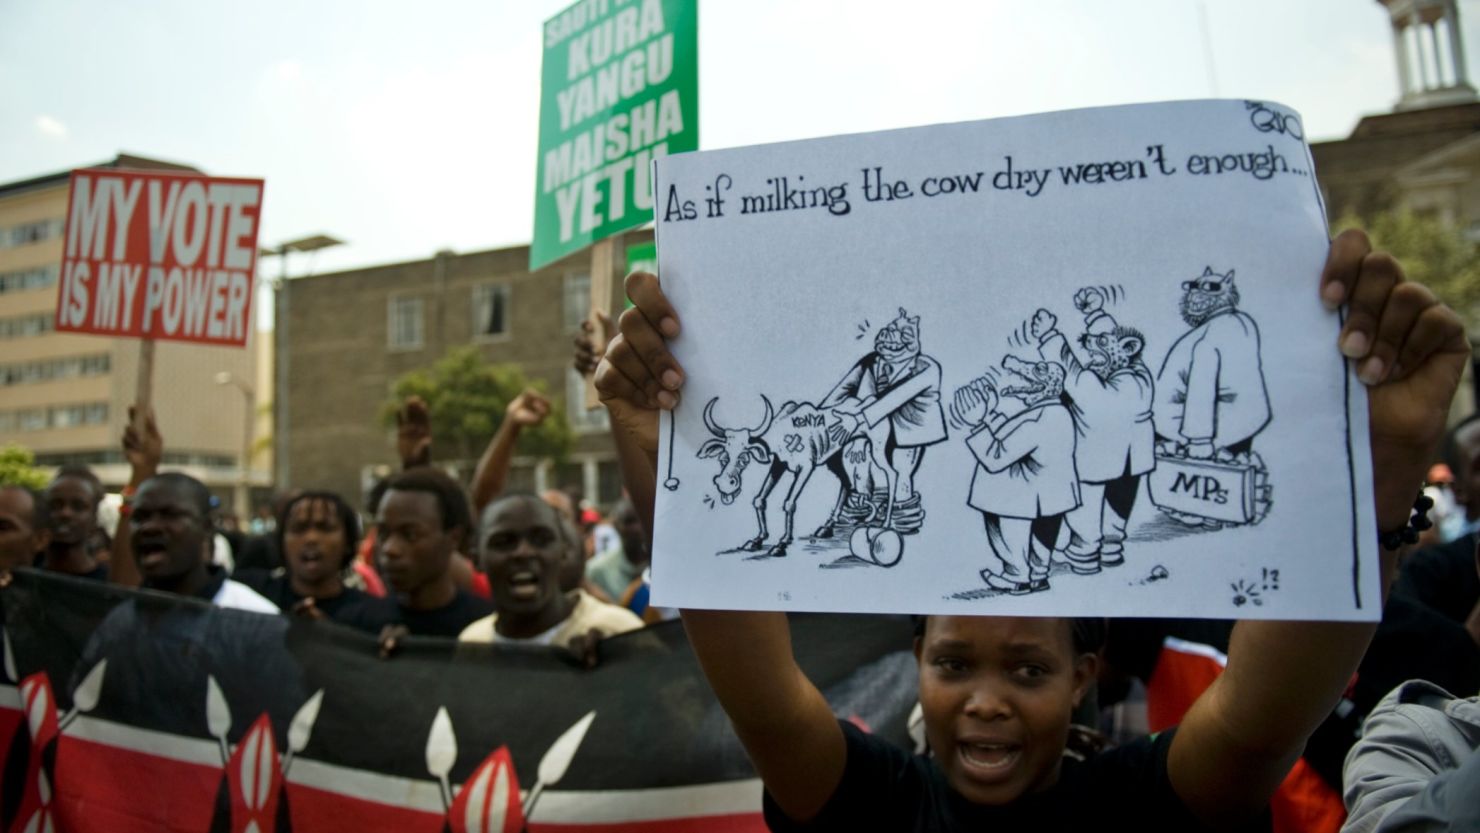 Demonstrators protest outside parliament in Nairobi on October 9, 2012 after lawmakers voted themselves a $110,000 bonus.